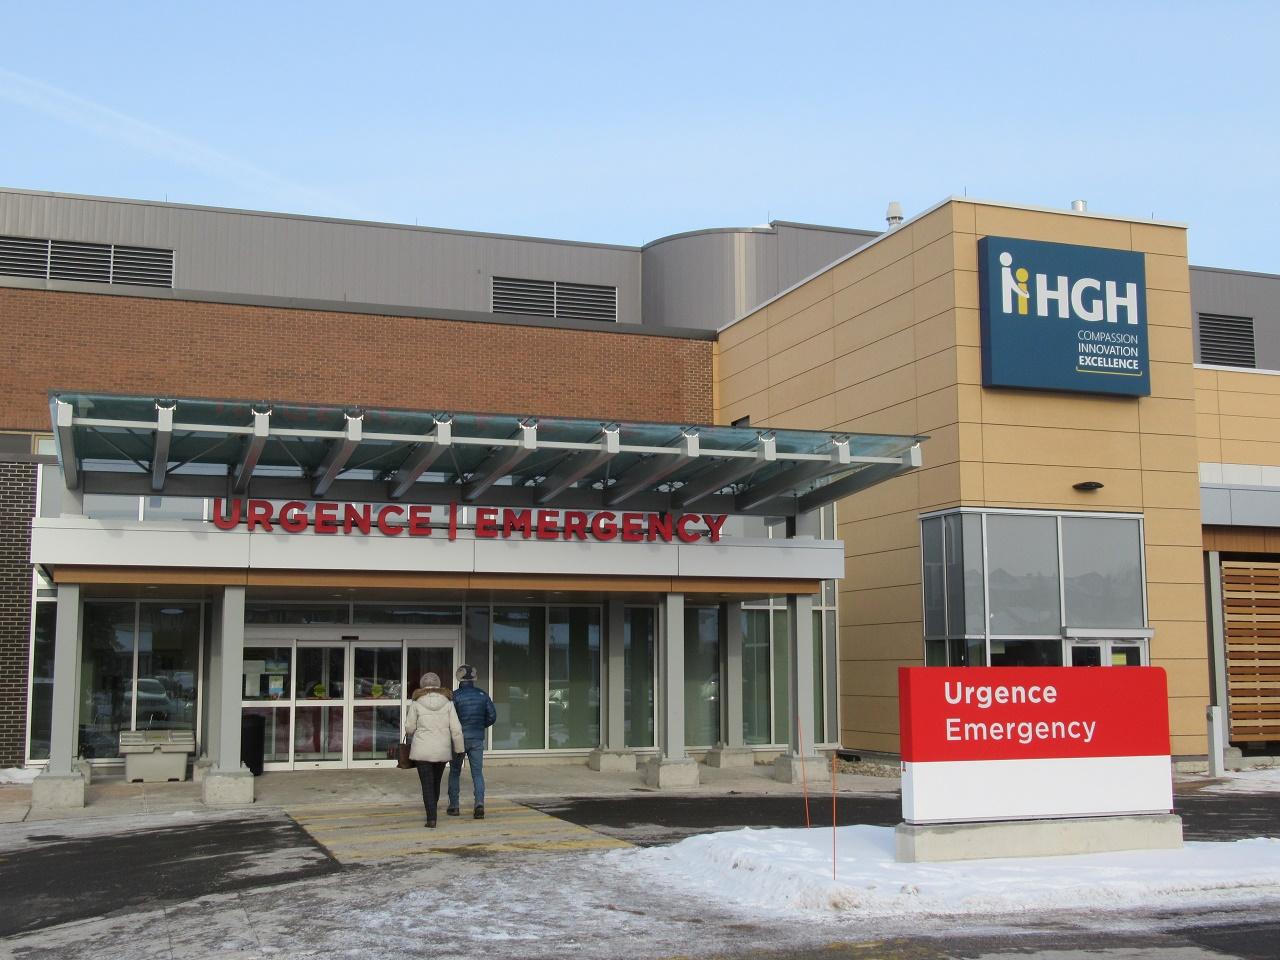 Virus season and holidays affected emergency waiting times at HGH